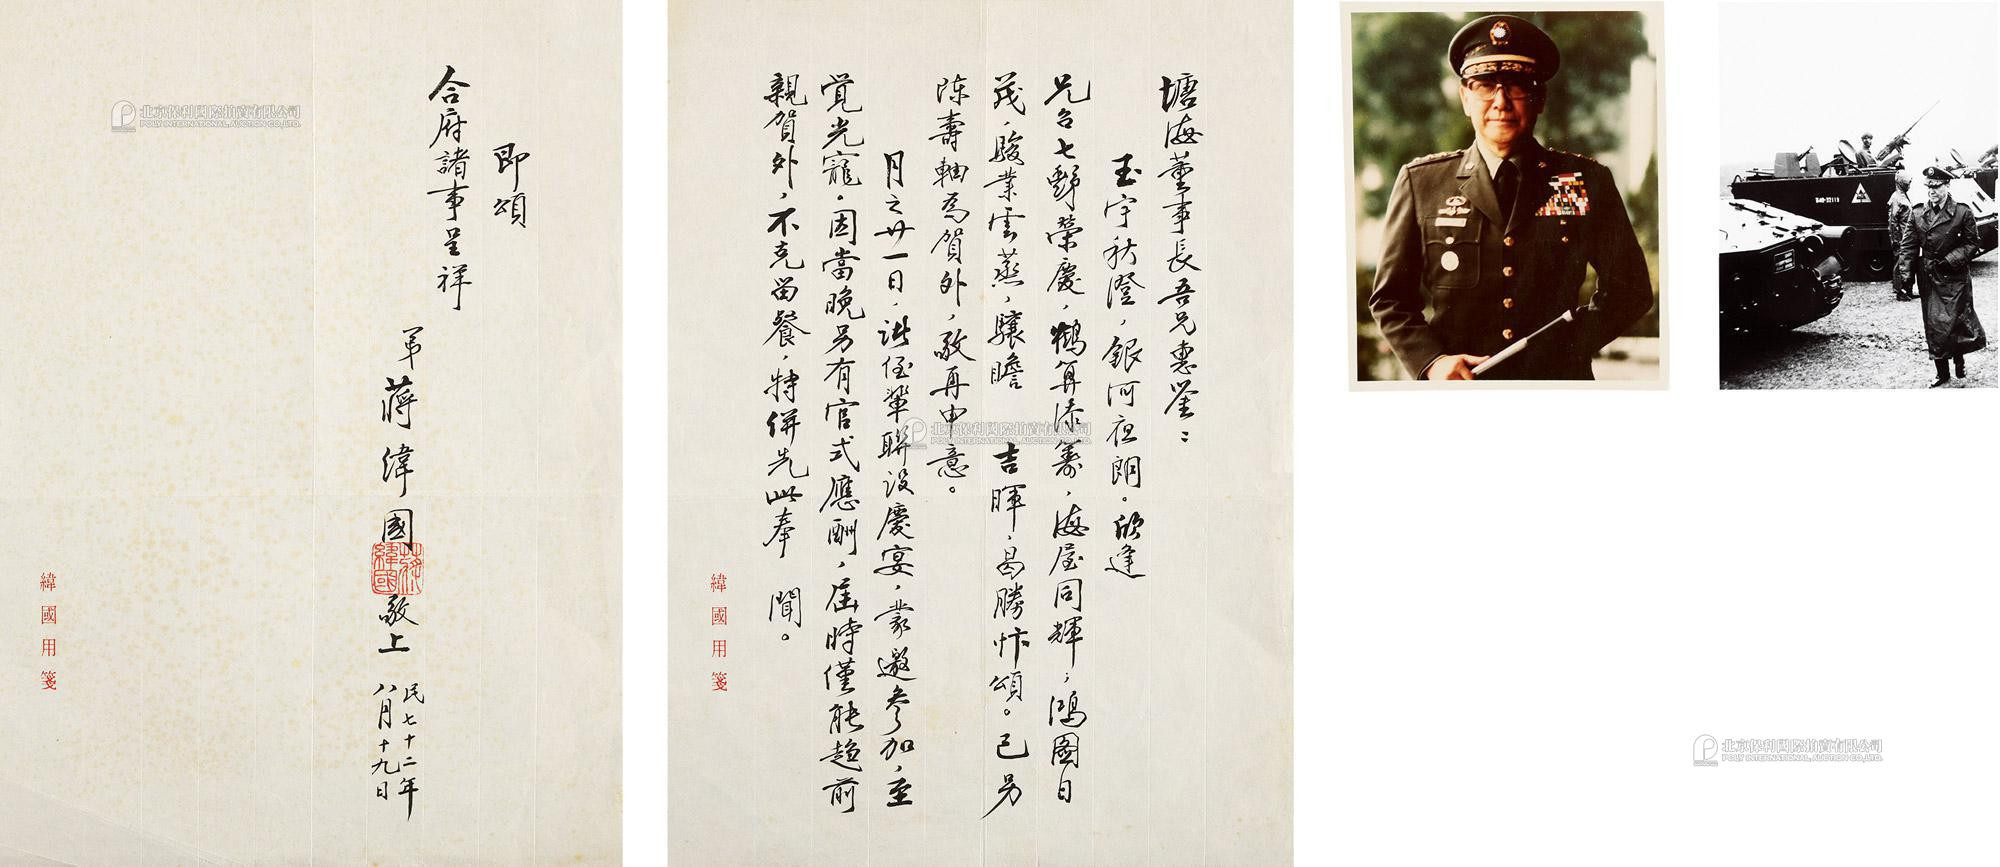 One Letter of two Pages by Chiang Wei-kuo， Attached with Information Photos